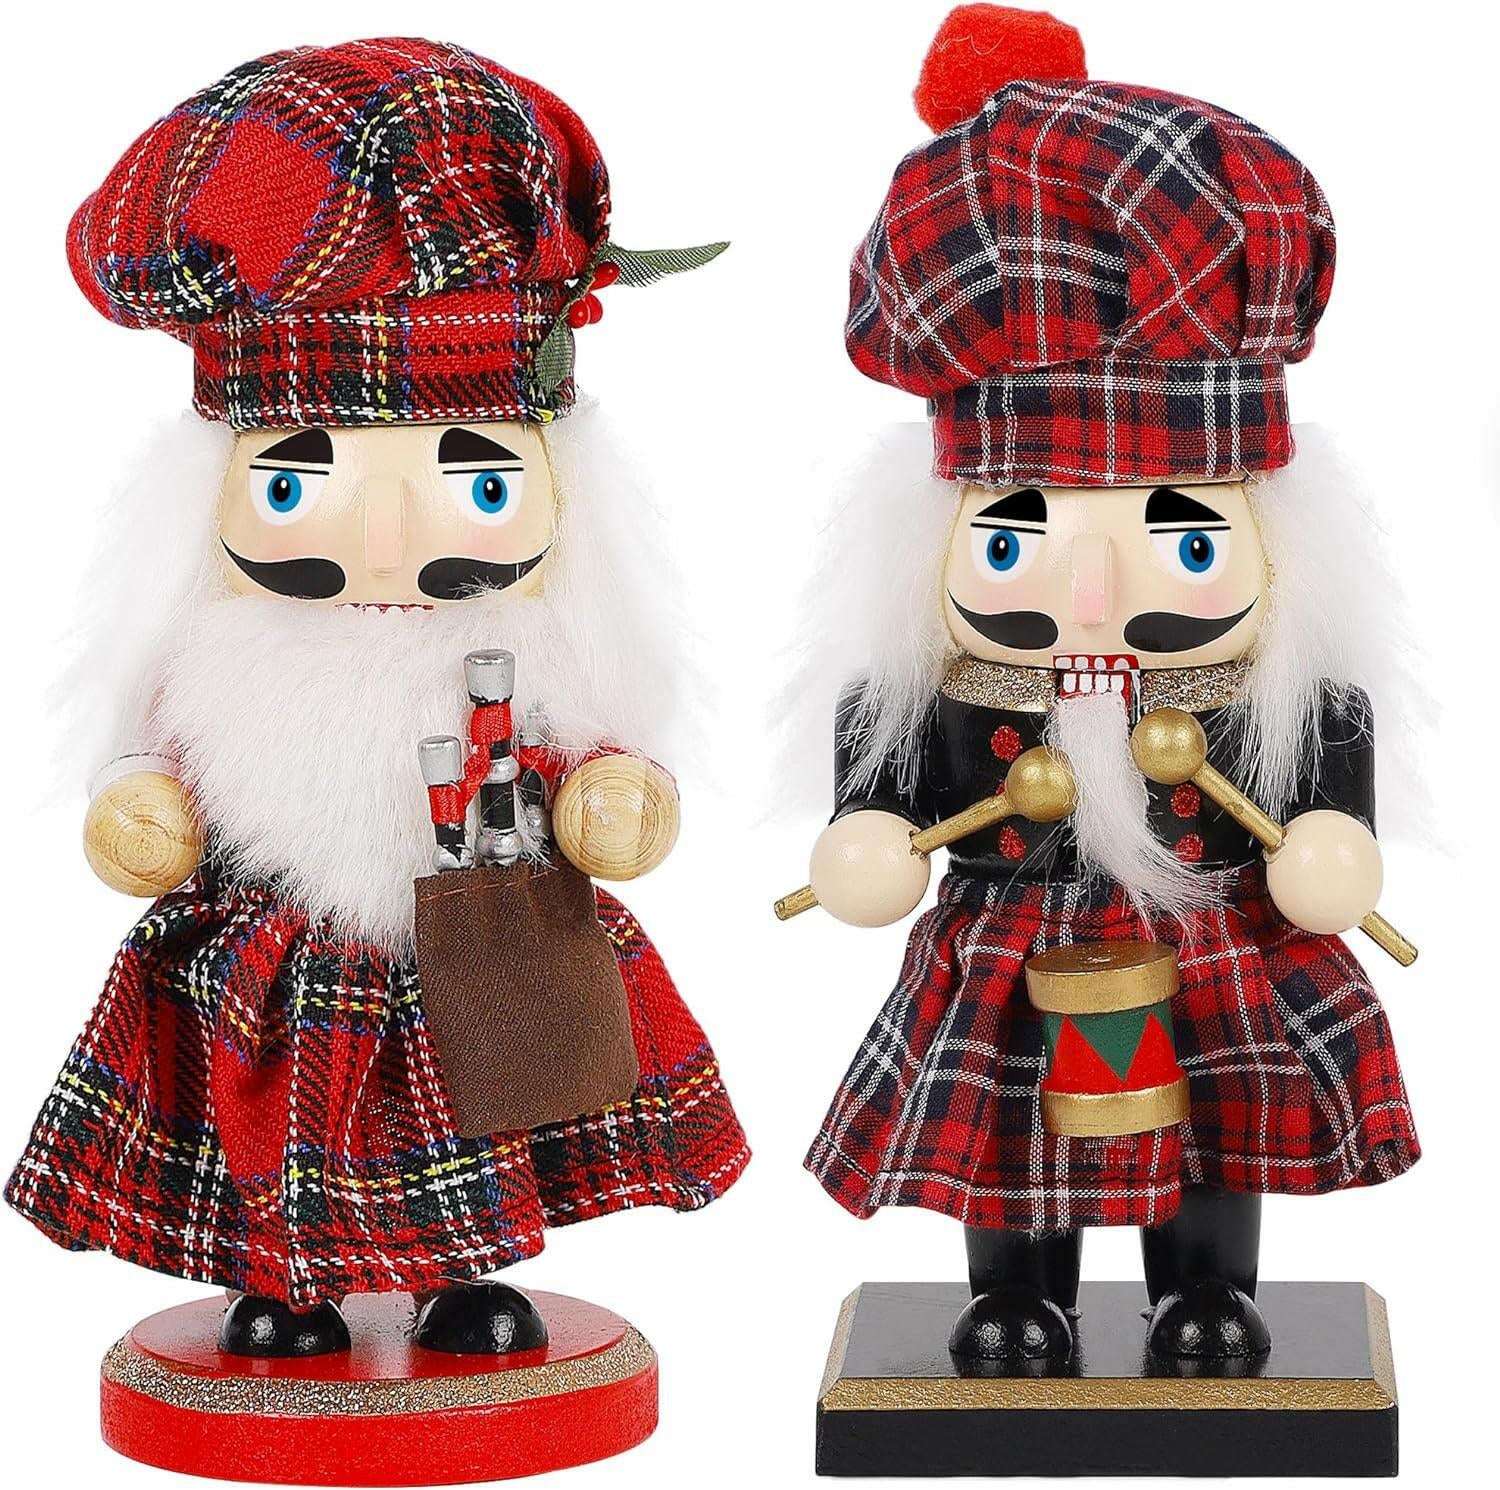 Set of 2 Christmas Nutcracker Figures, 7.9 Inch Wooden Nutcracker Drummer and Bagpiper Ornaments, Large Nutcrackers - The European Gift Store